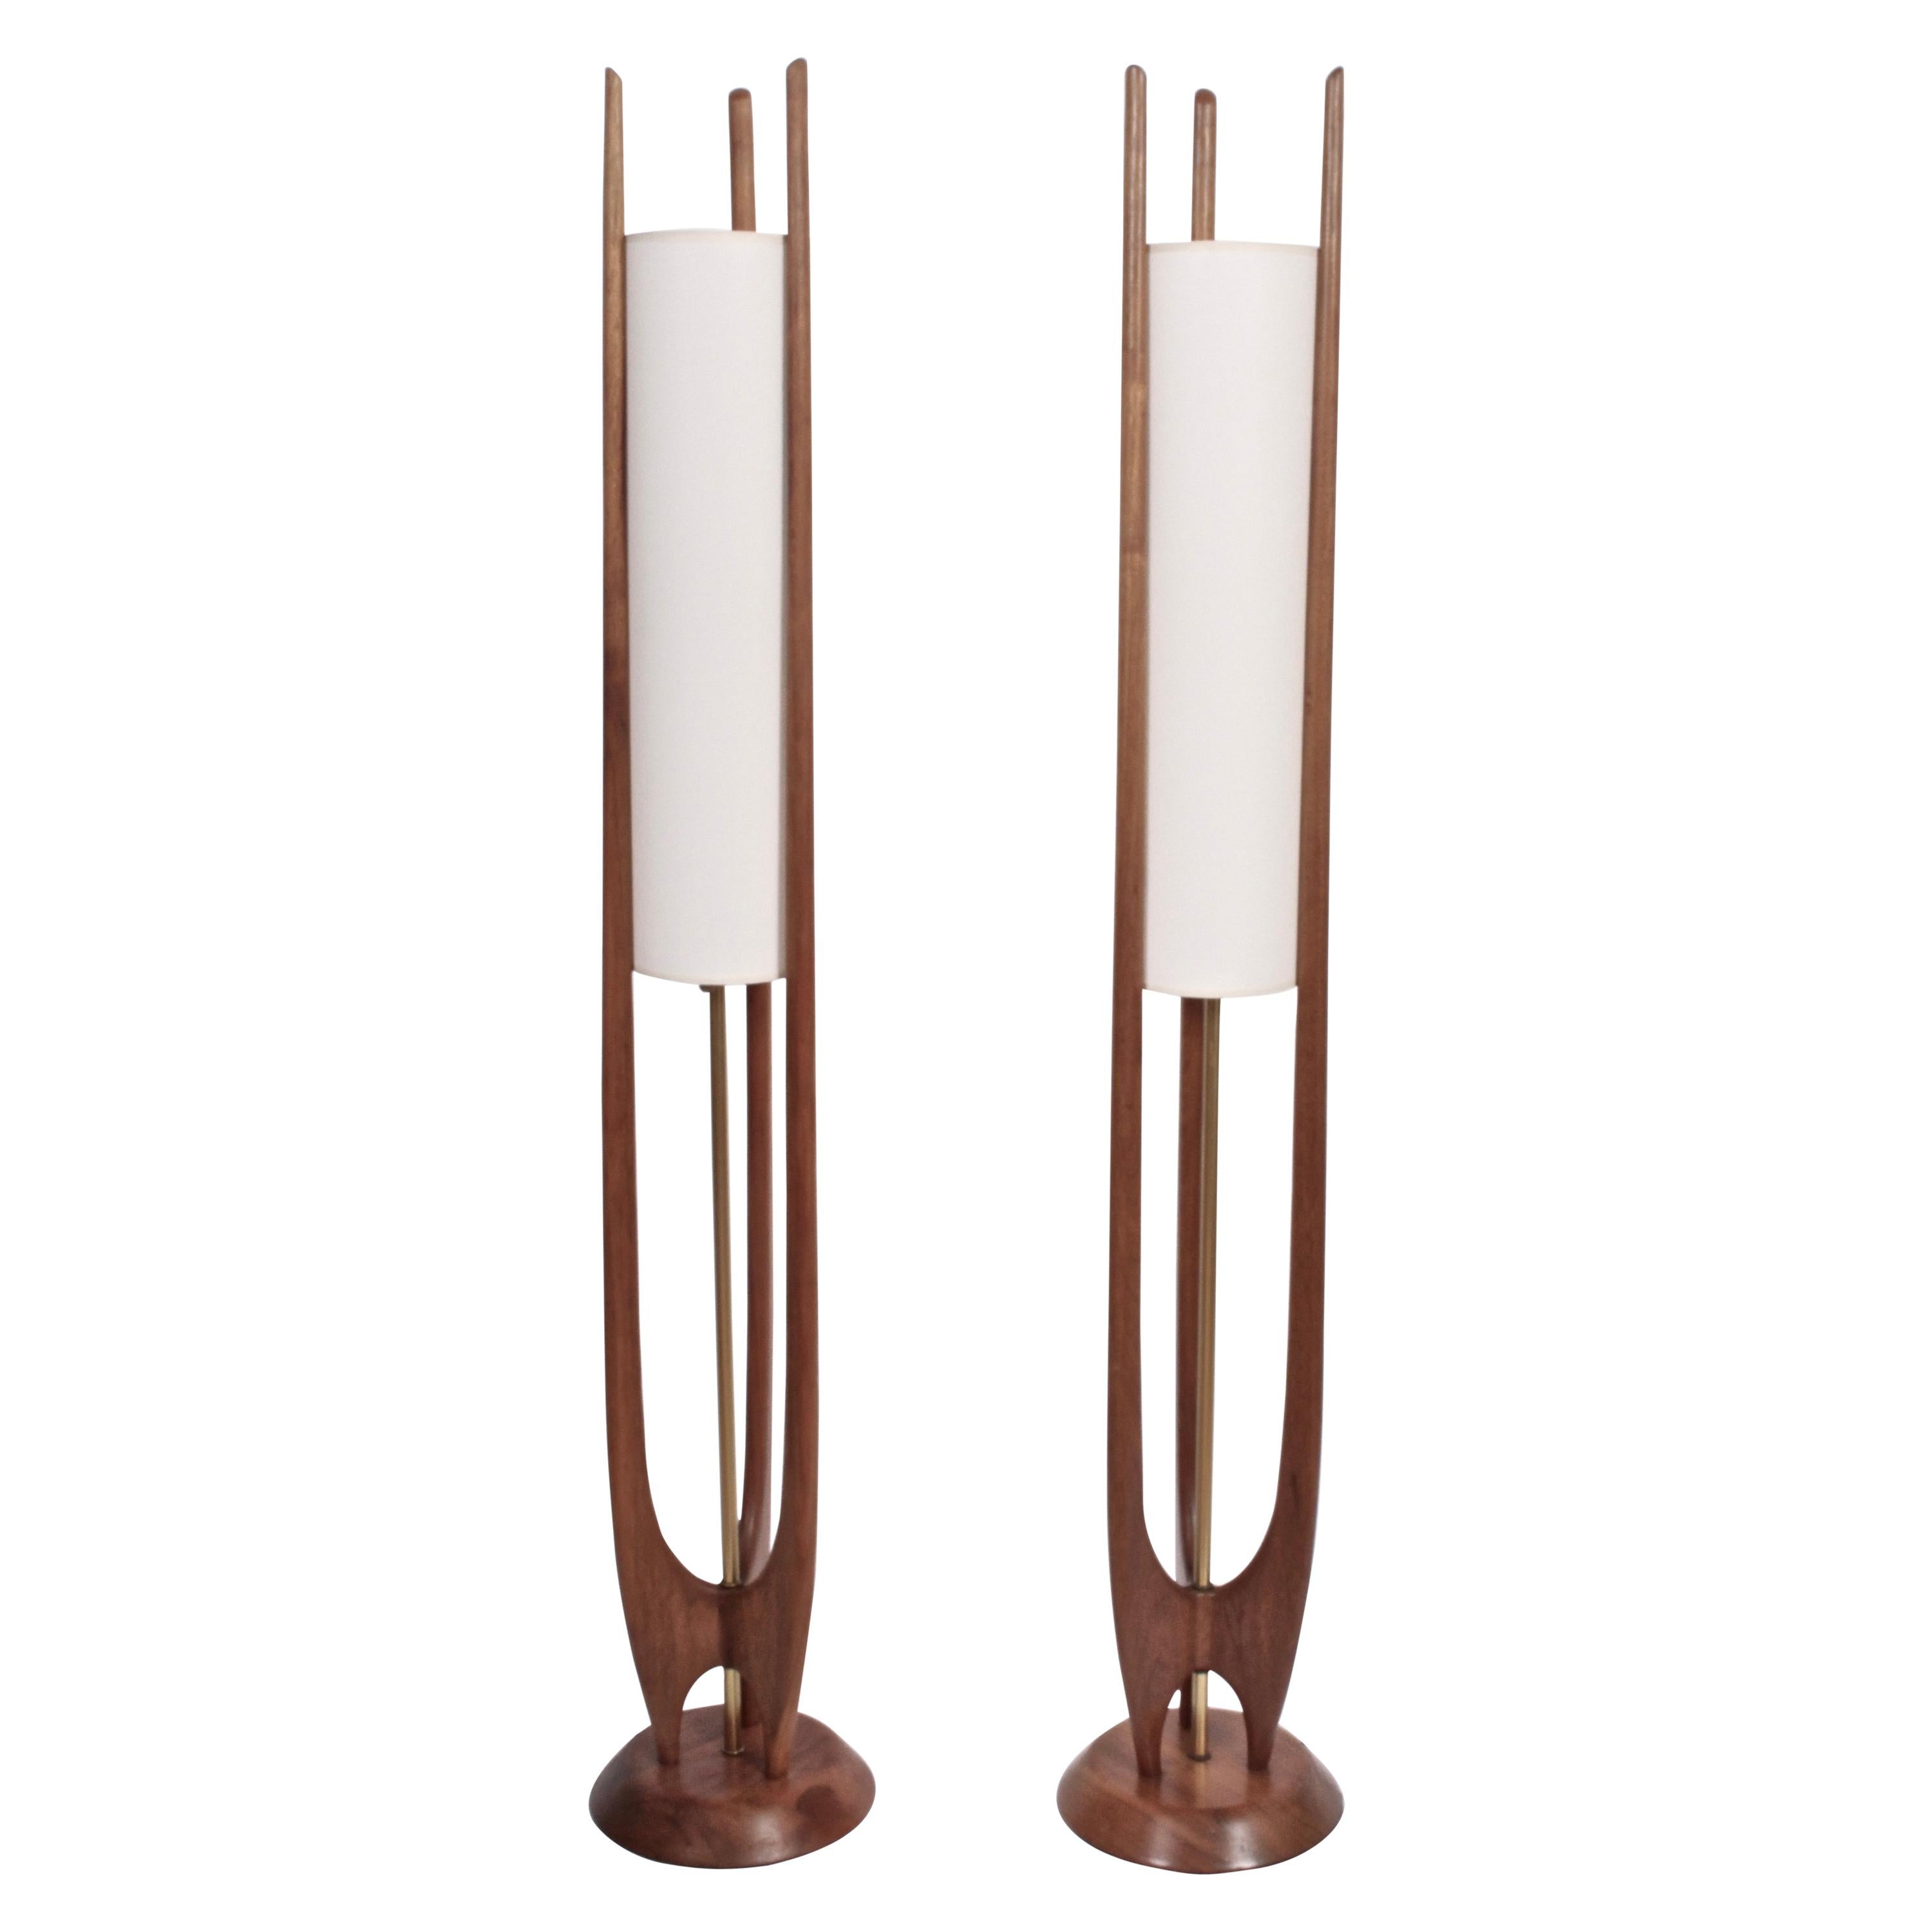 Pair of Modeline Walnut and Brass Floor Lamps with White Linen Shades